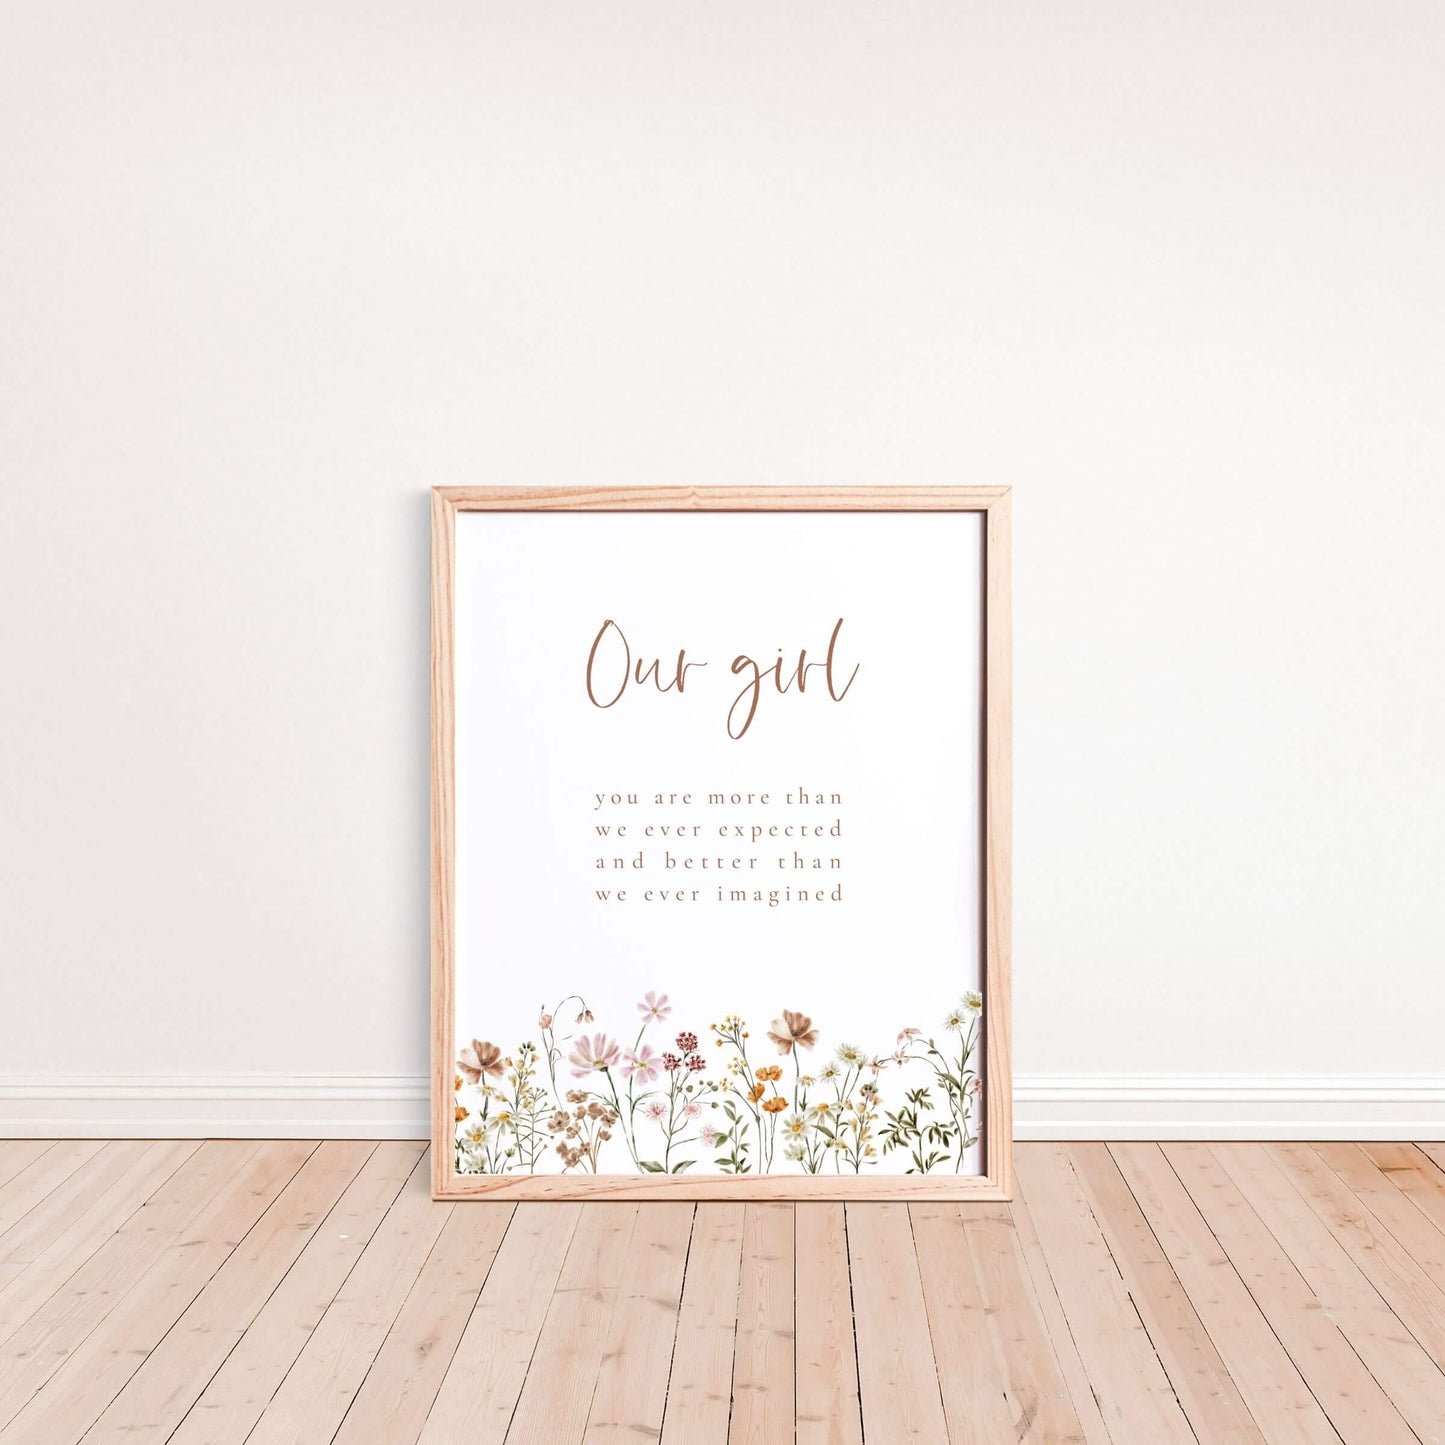 Our girl wall art with wildflowers in a wood frame